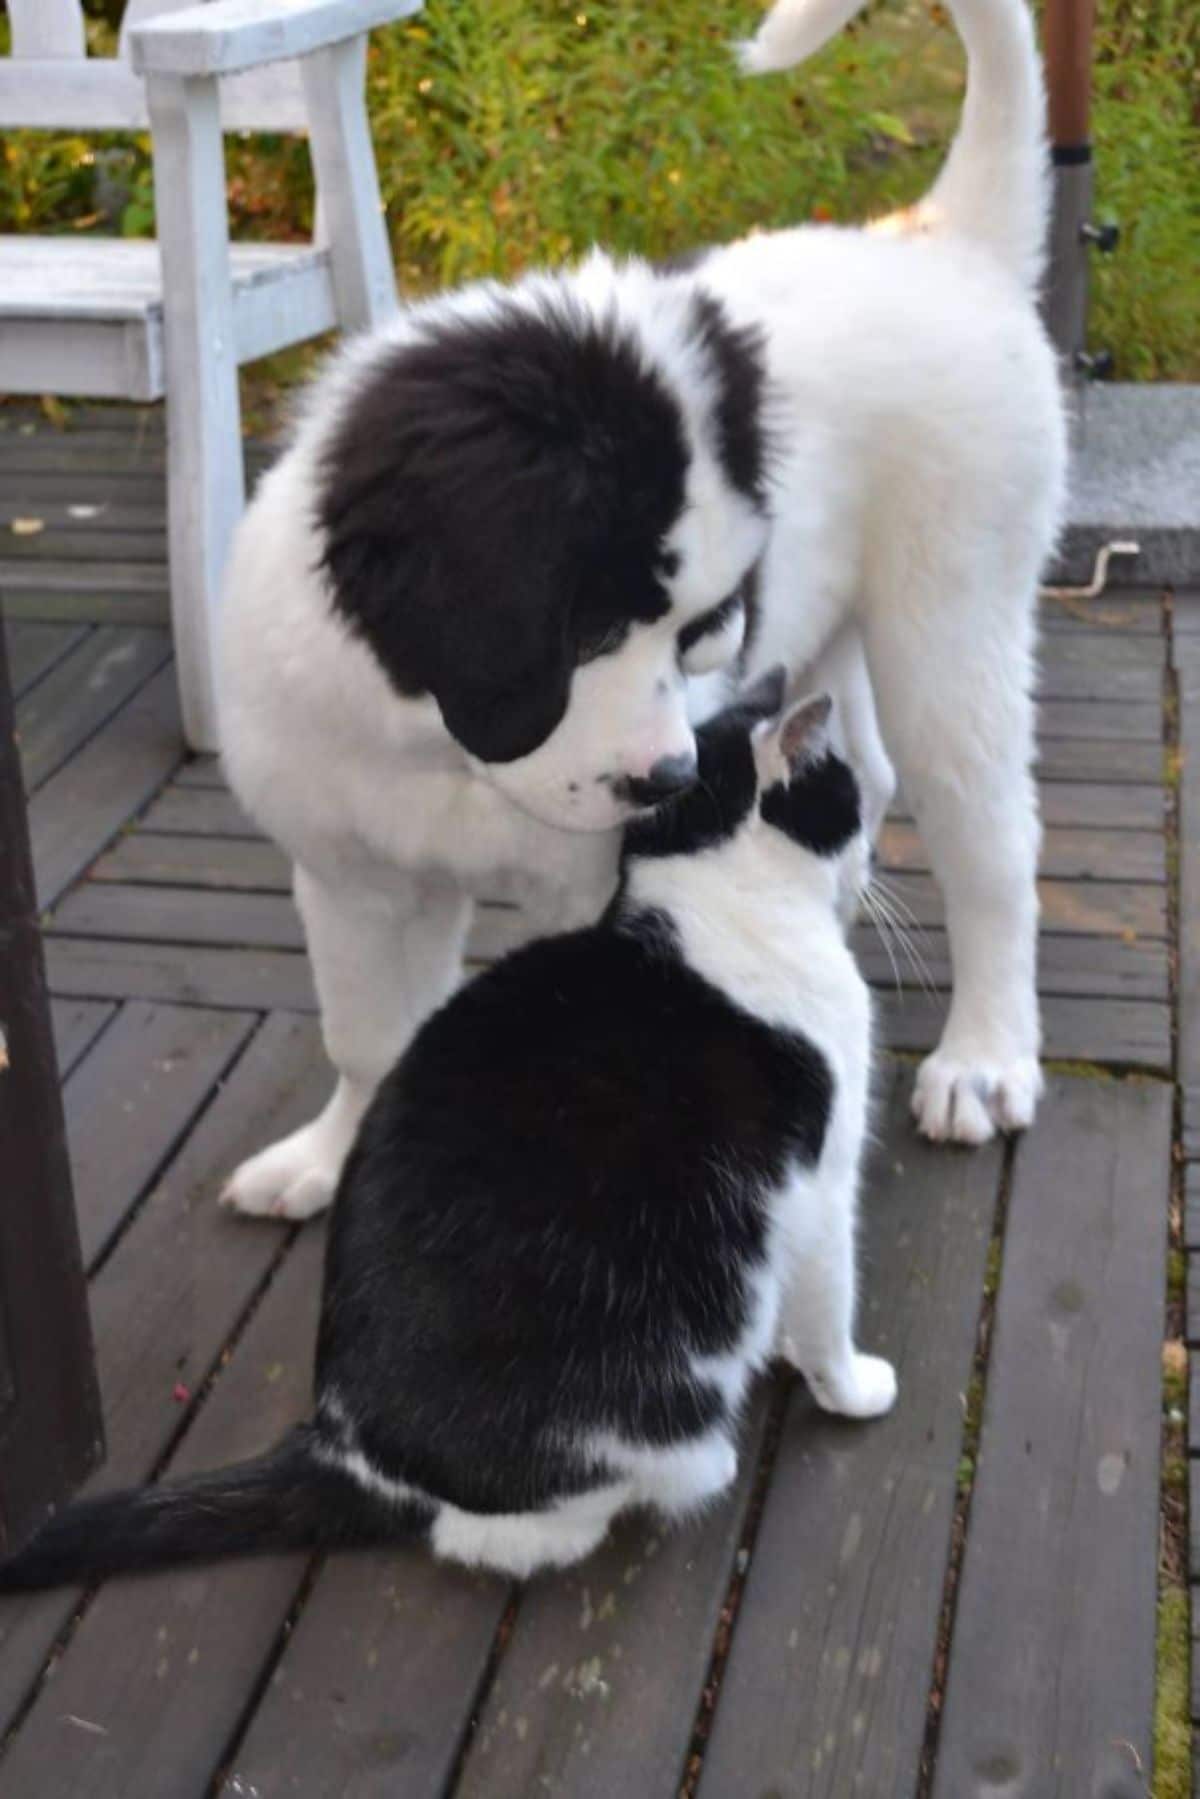 black and white dog and cat sniffing each other on a patio